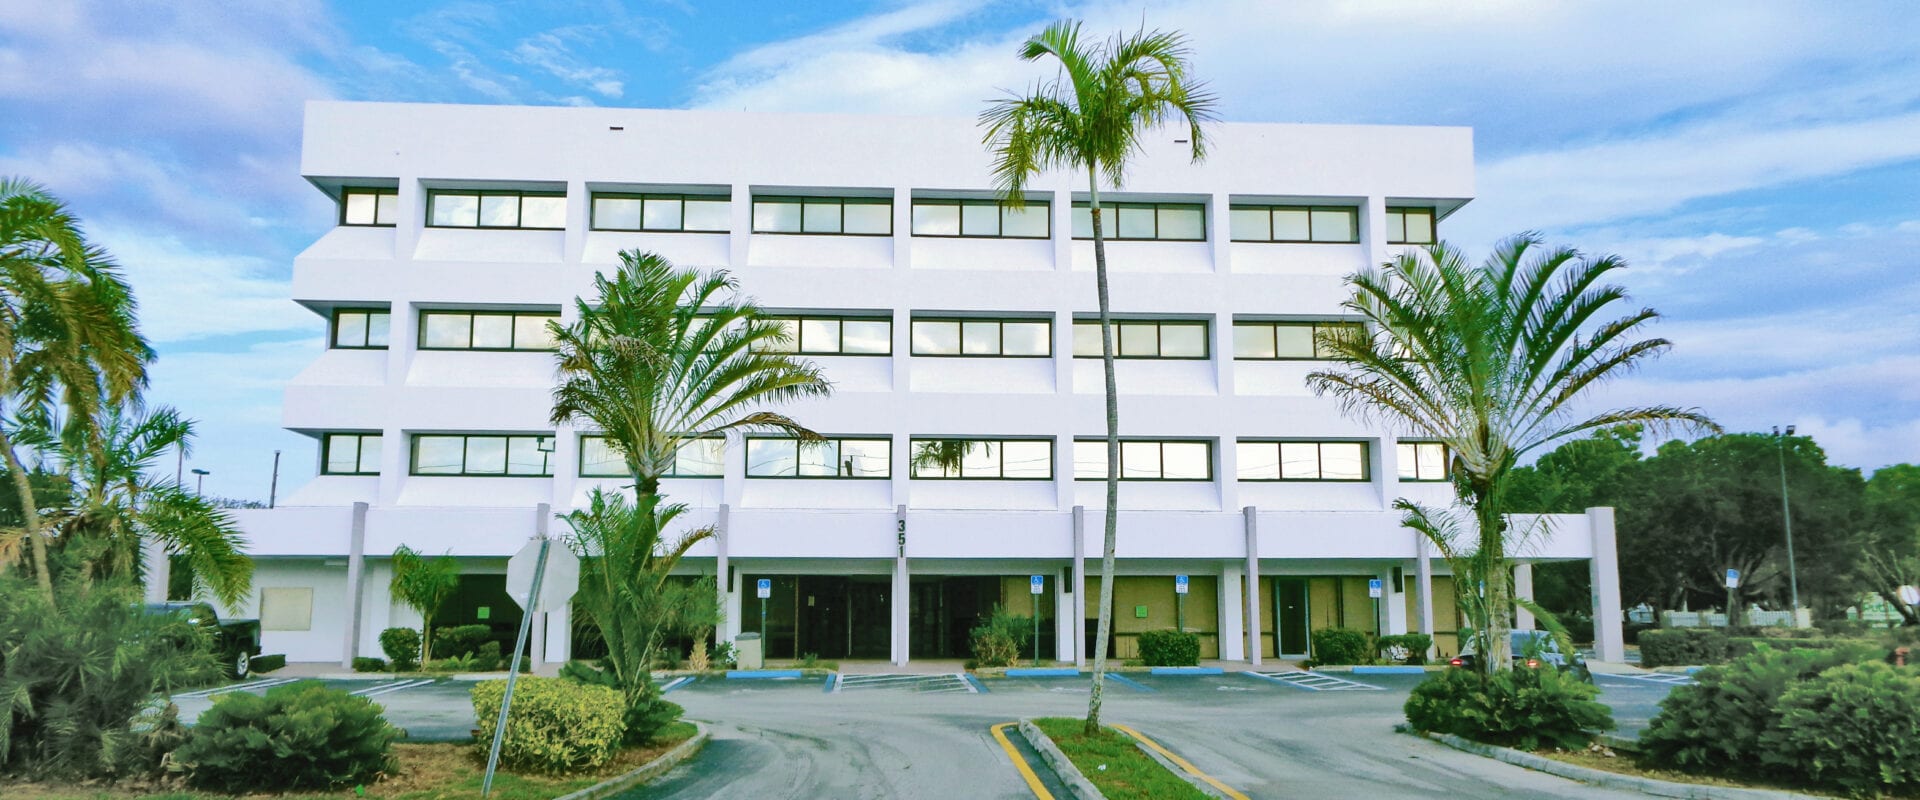 For Lease Office Space Pompano Beach 264 SF